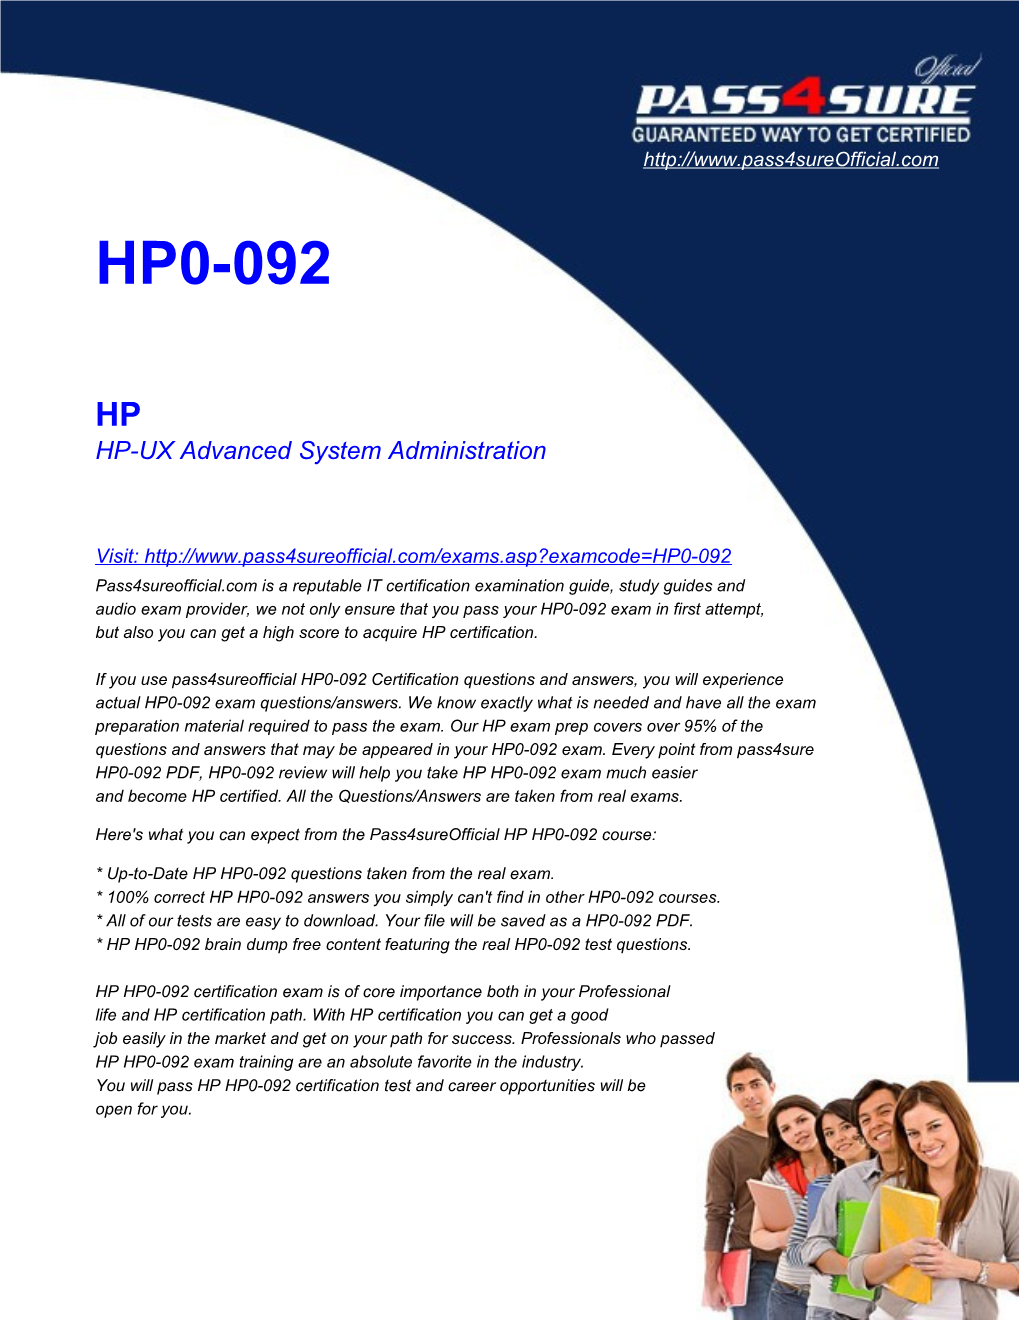 HP-UX Advanced System Administration